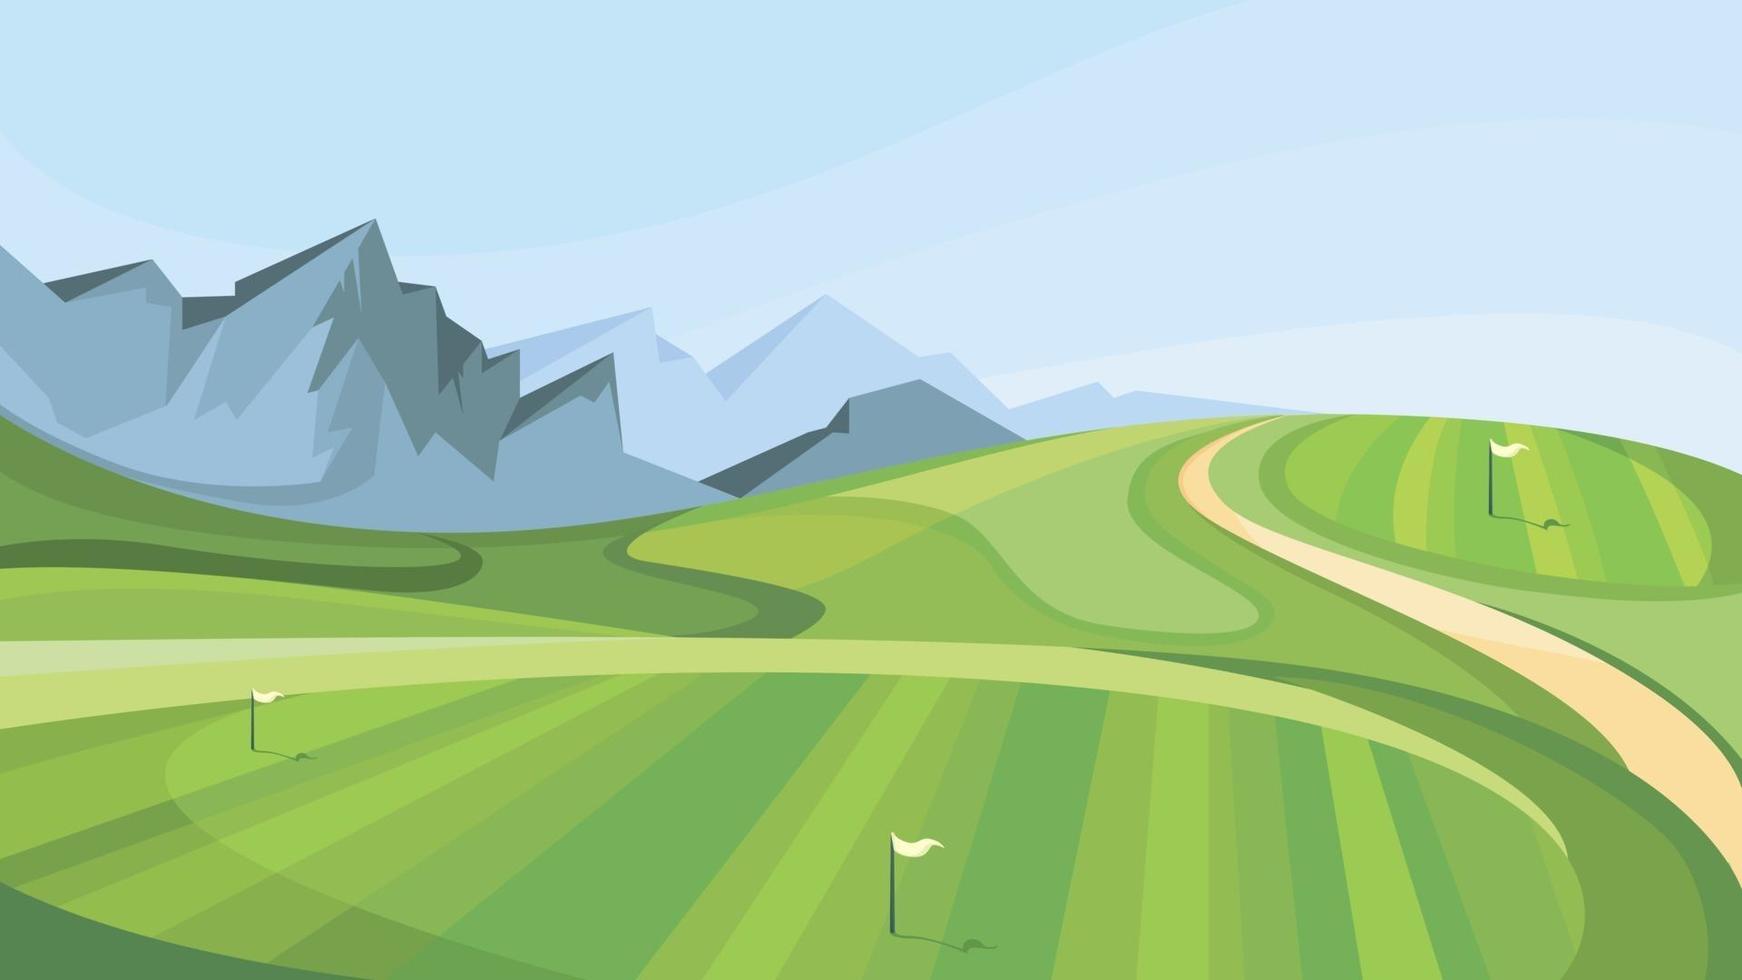 Golf course with mountains in the background. vector